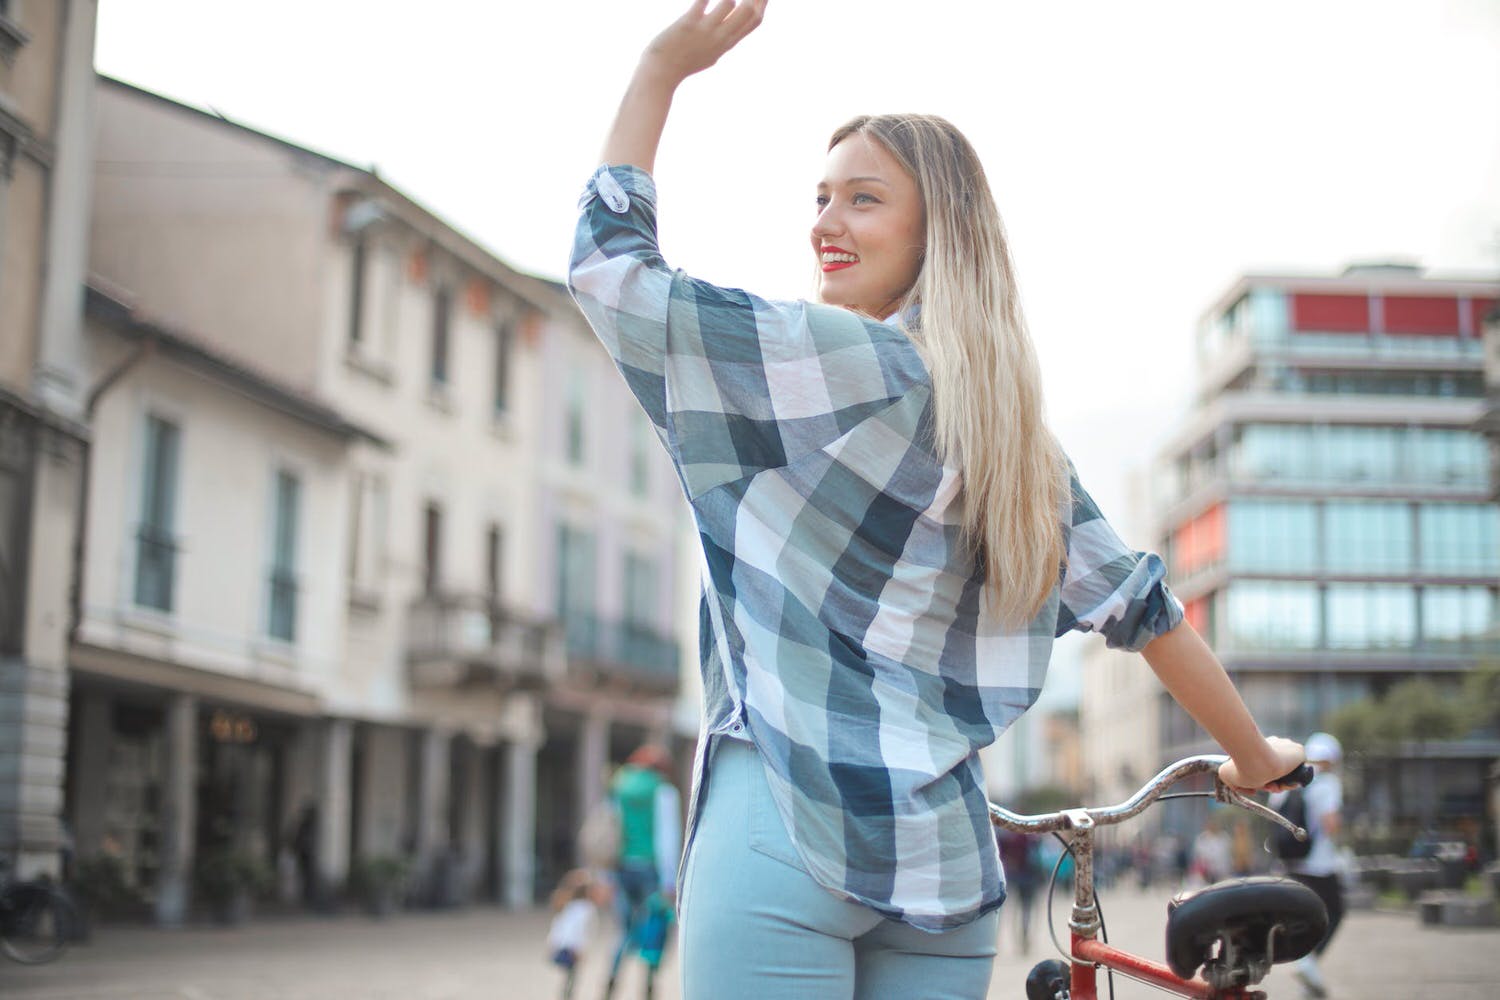 back view photo of smiling woman in checkered shirt and blue denim jeans standing with a bicycle waving